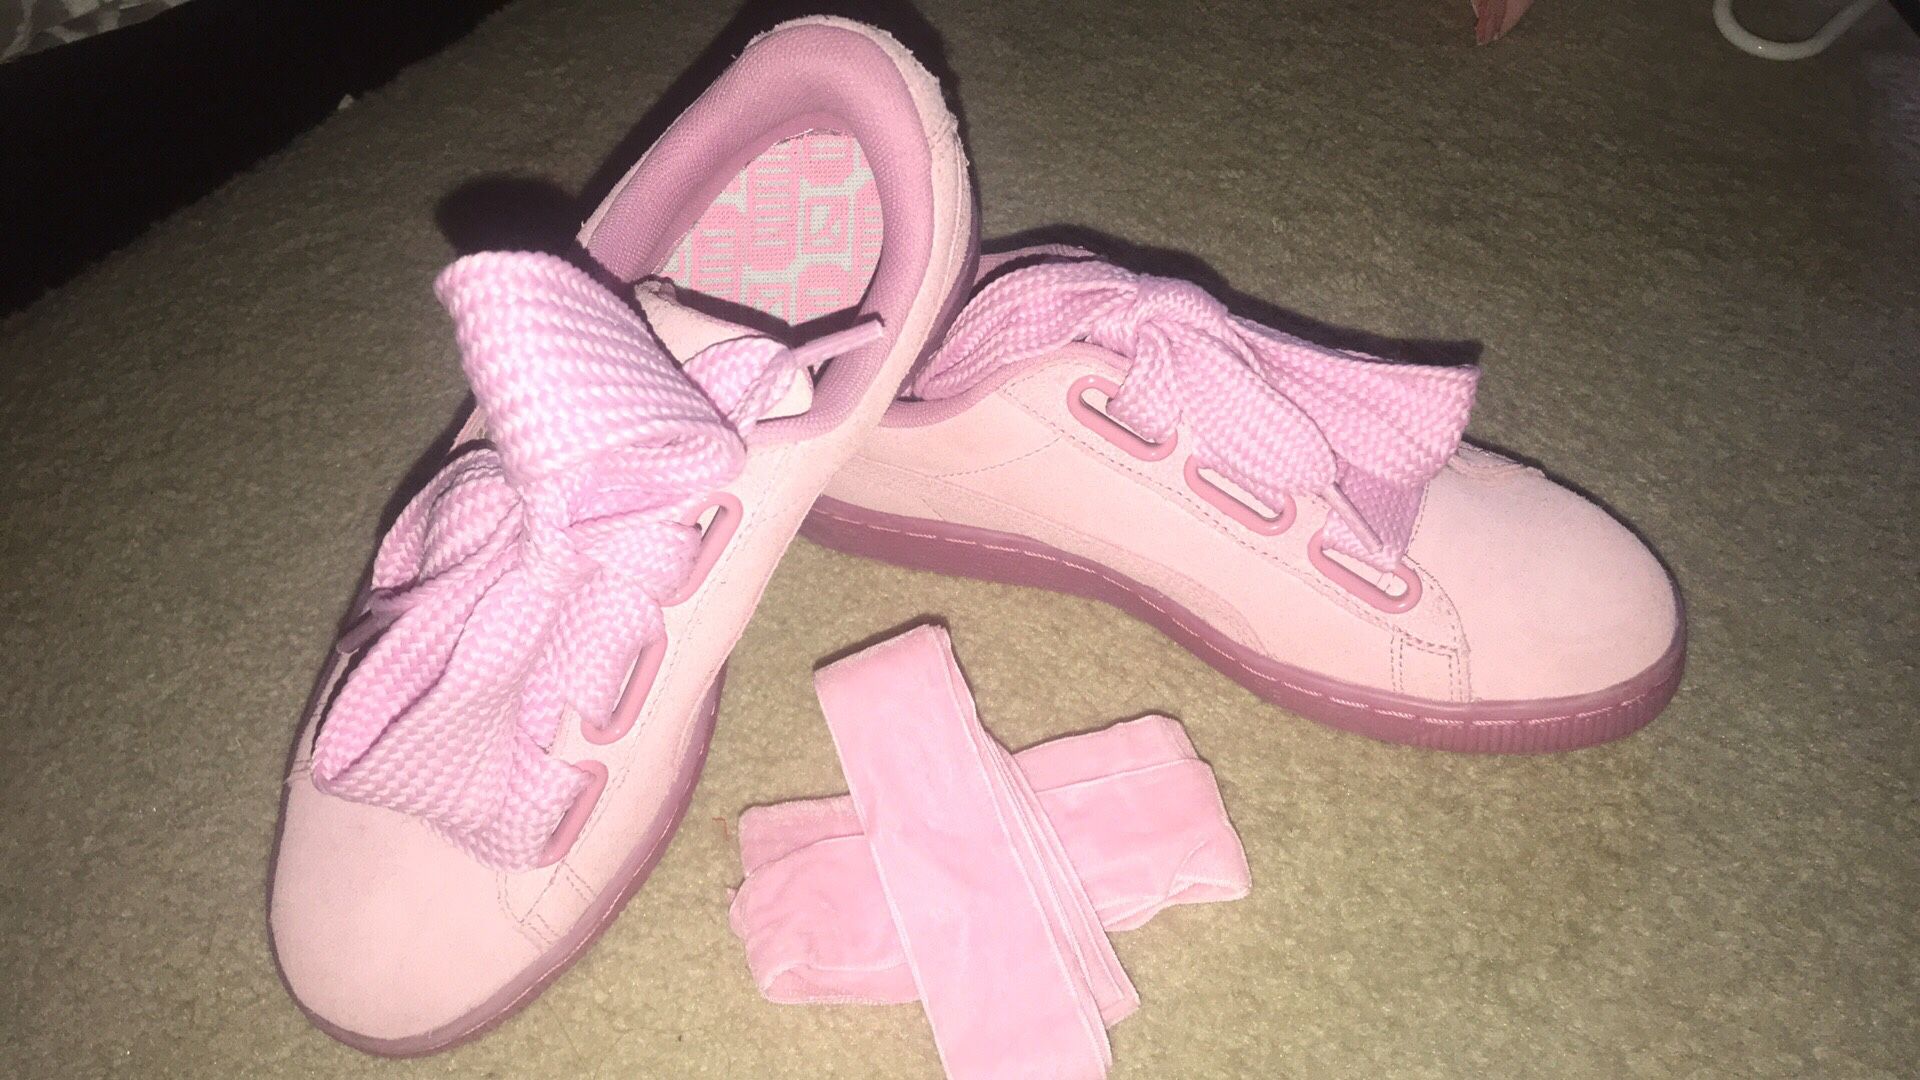 Pink Puma Suede Sneakers, Size 7 (New) $35